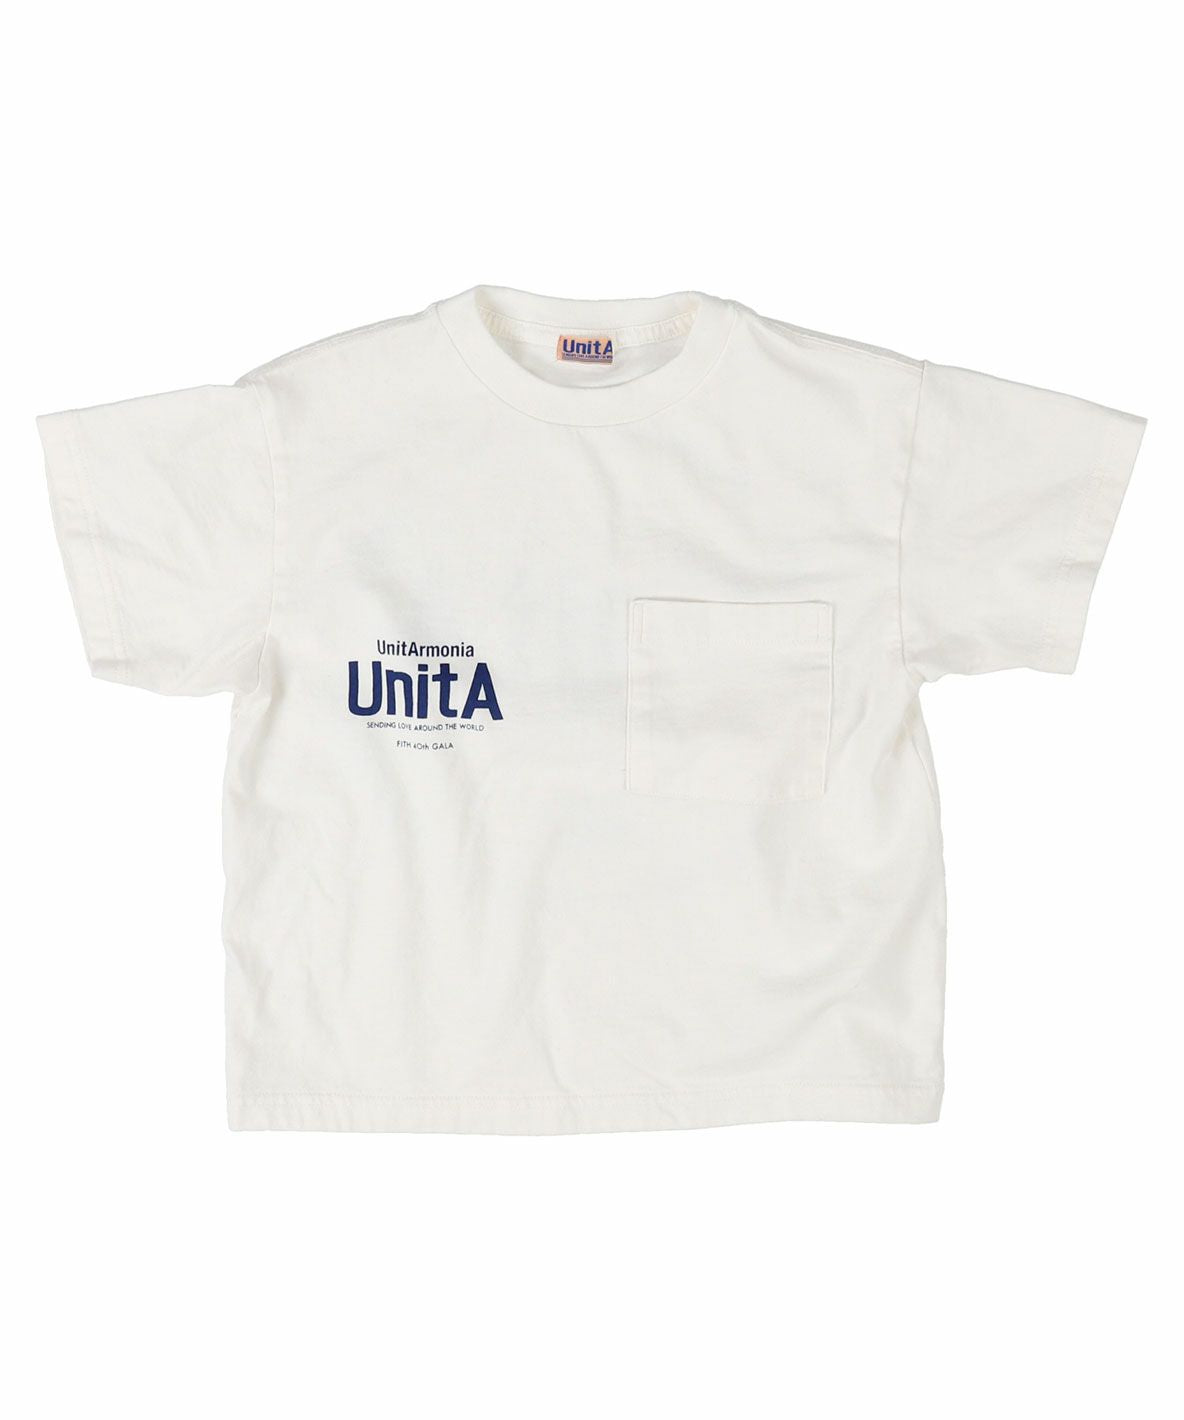 UnitA ウニタ 子供服 株式会社フィス 公式通販サイト – FITH ONLINE STORE